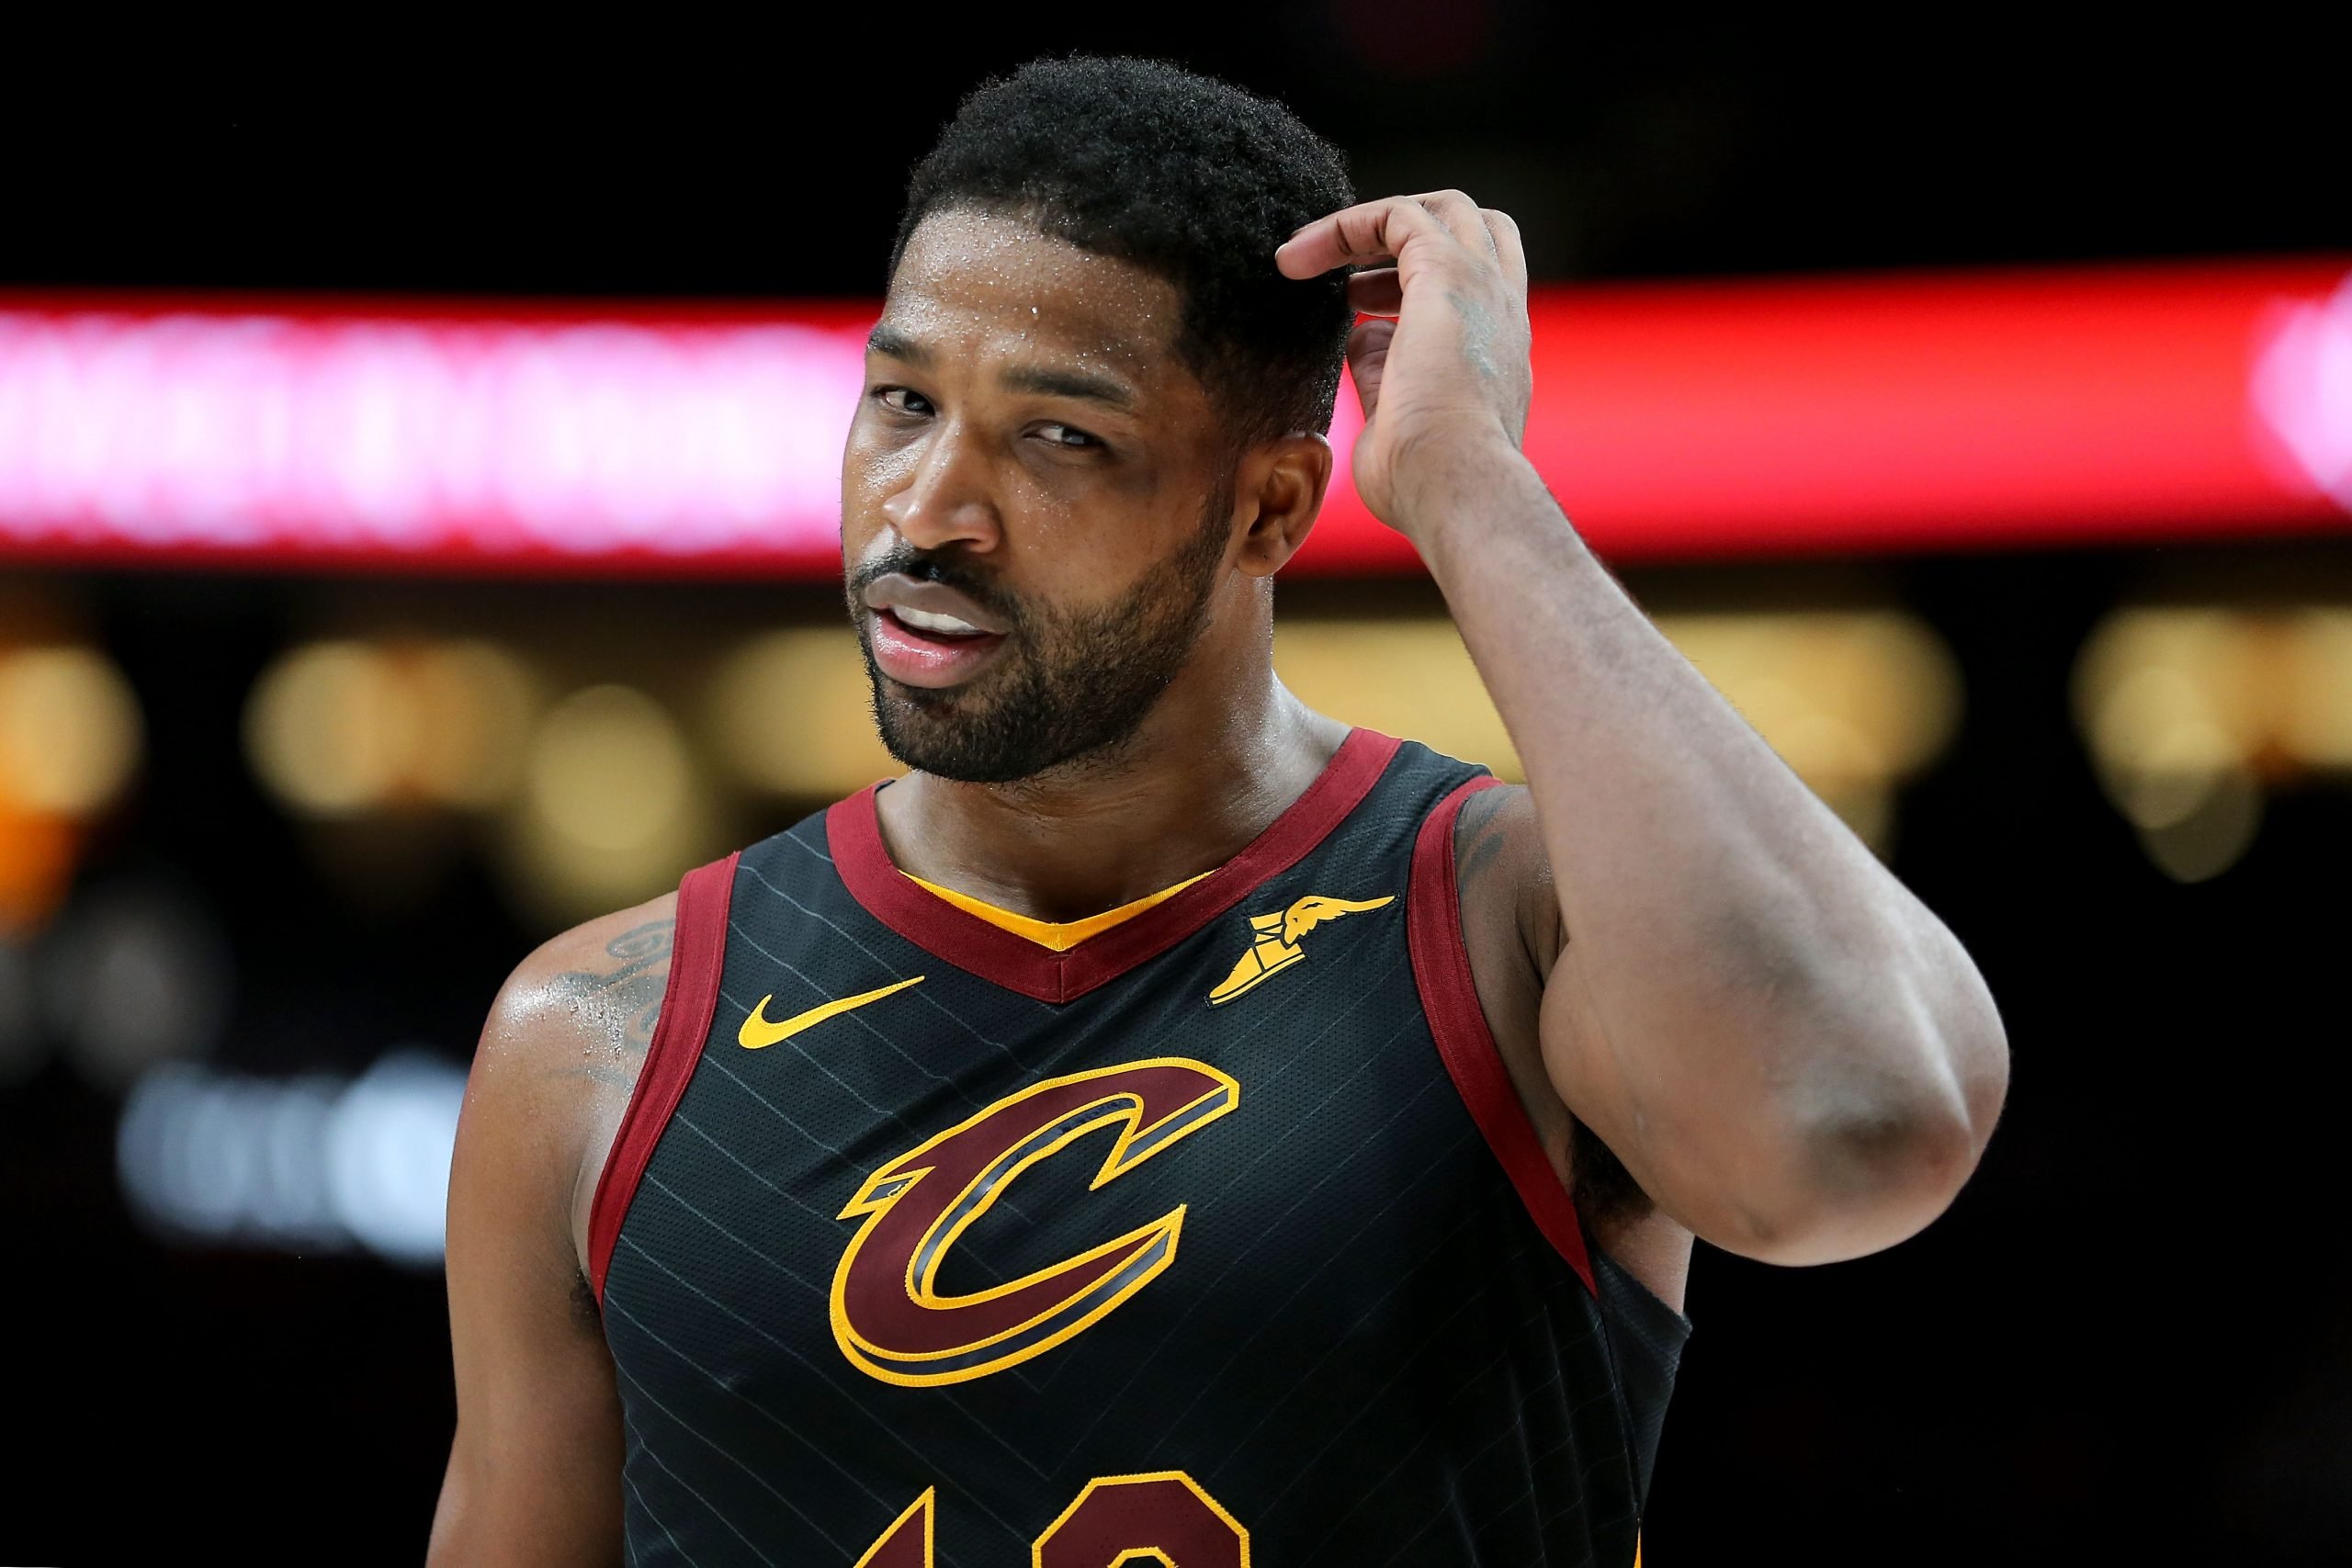 Tristan Thompson Got a New Hairstyle and Fans Are Trolling Him for It: ‘It’s Giving Me R. Kelly Vibes’